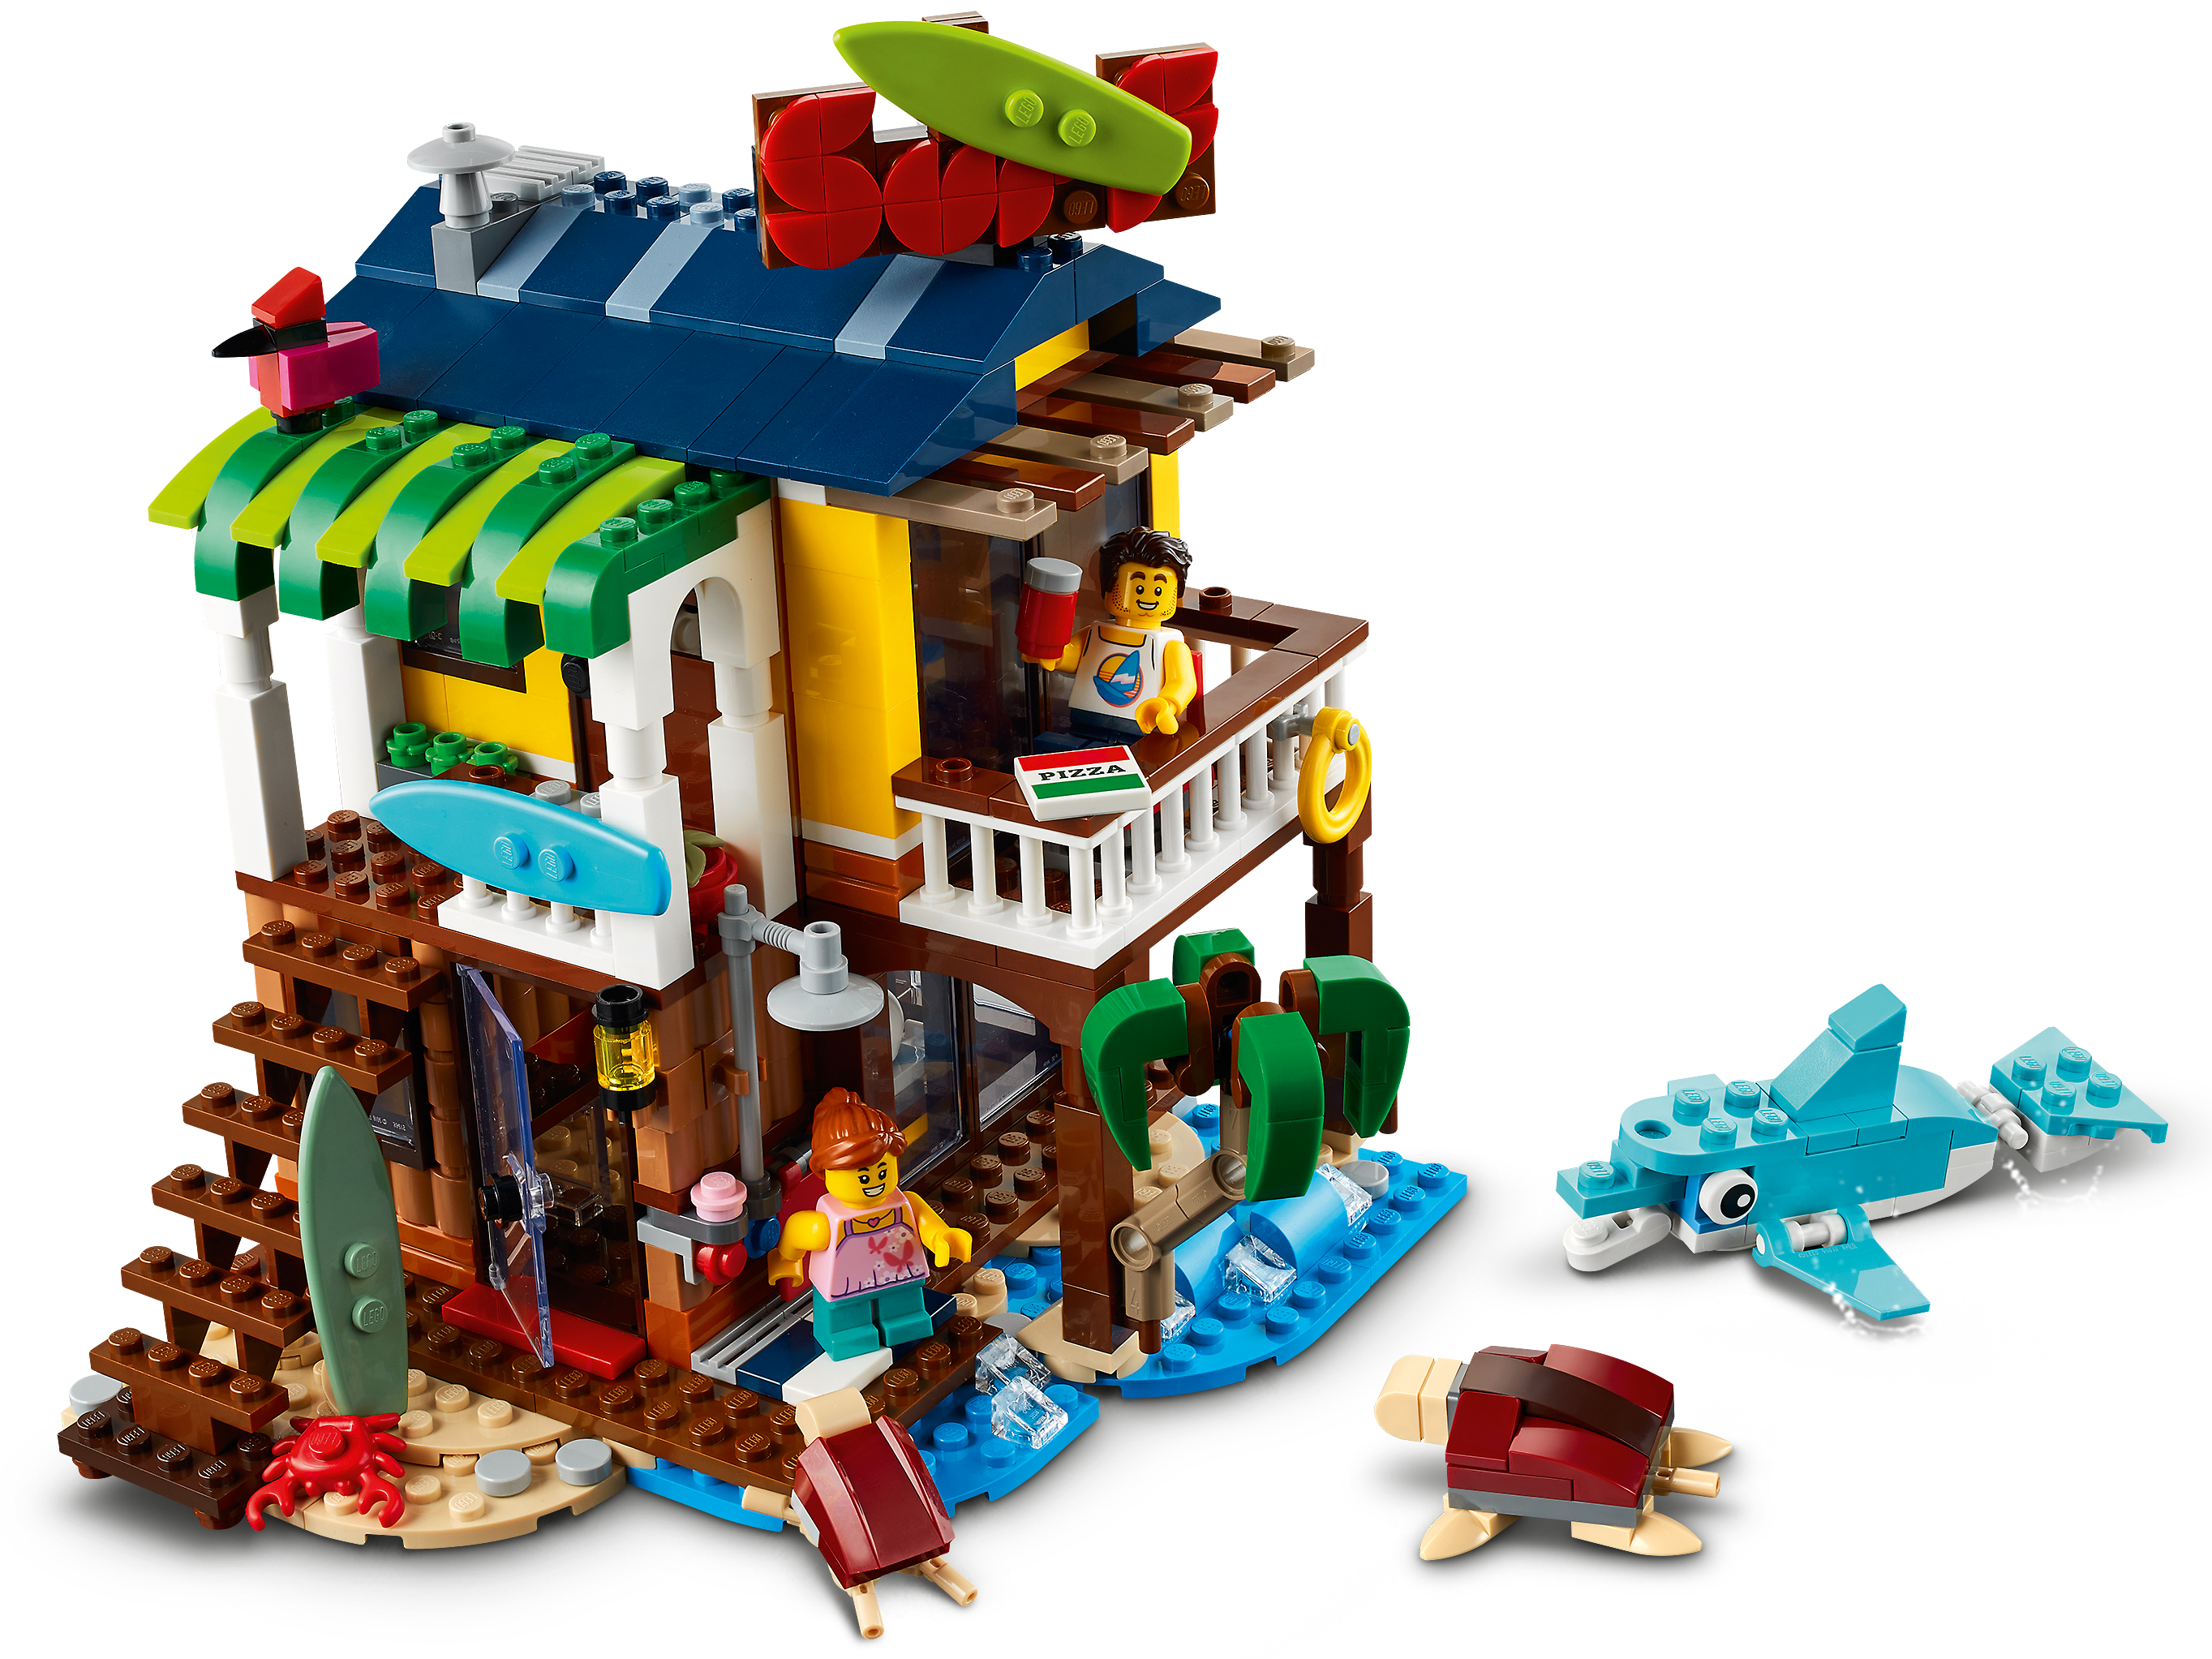 LEGO Creator 3 in 1 Surfer Beach House with 2 Minifigures and Dolphin  Figure, Transforms from Surf Shack to Lighthouse to Pool House, Great  Building